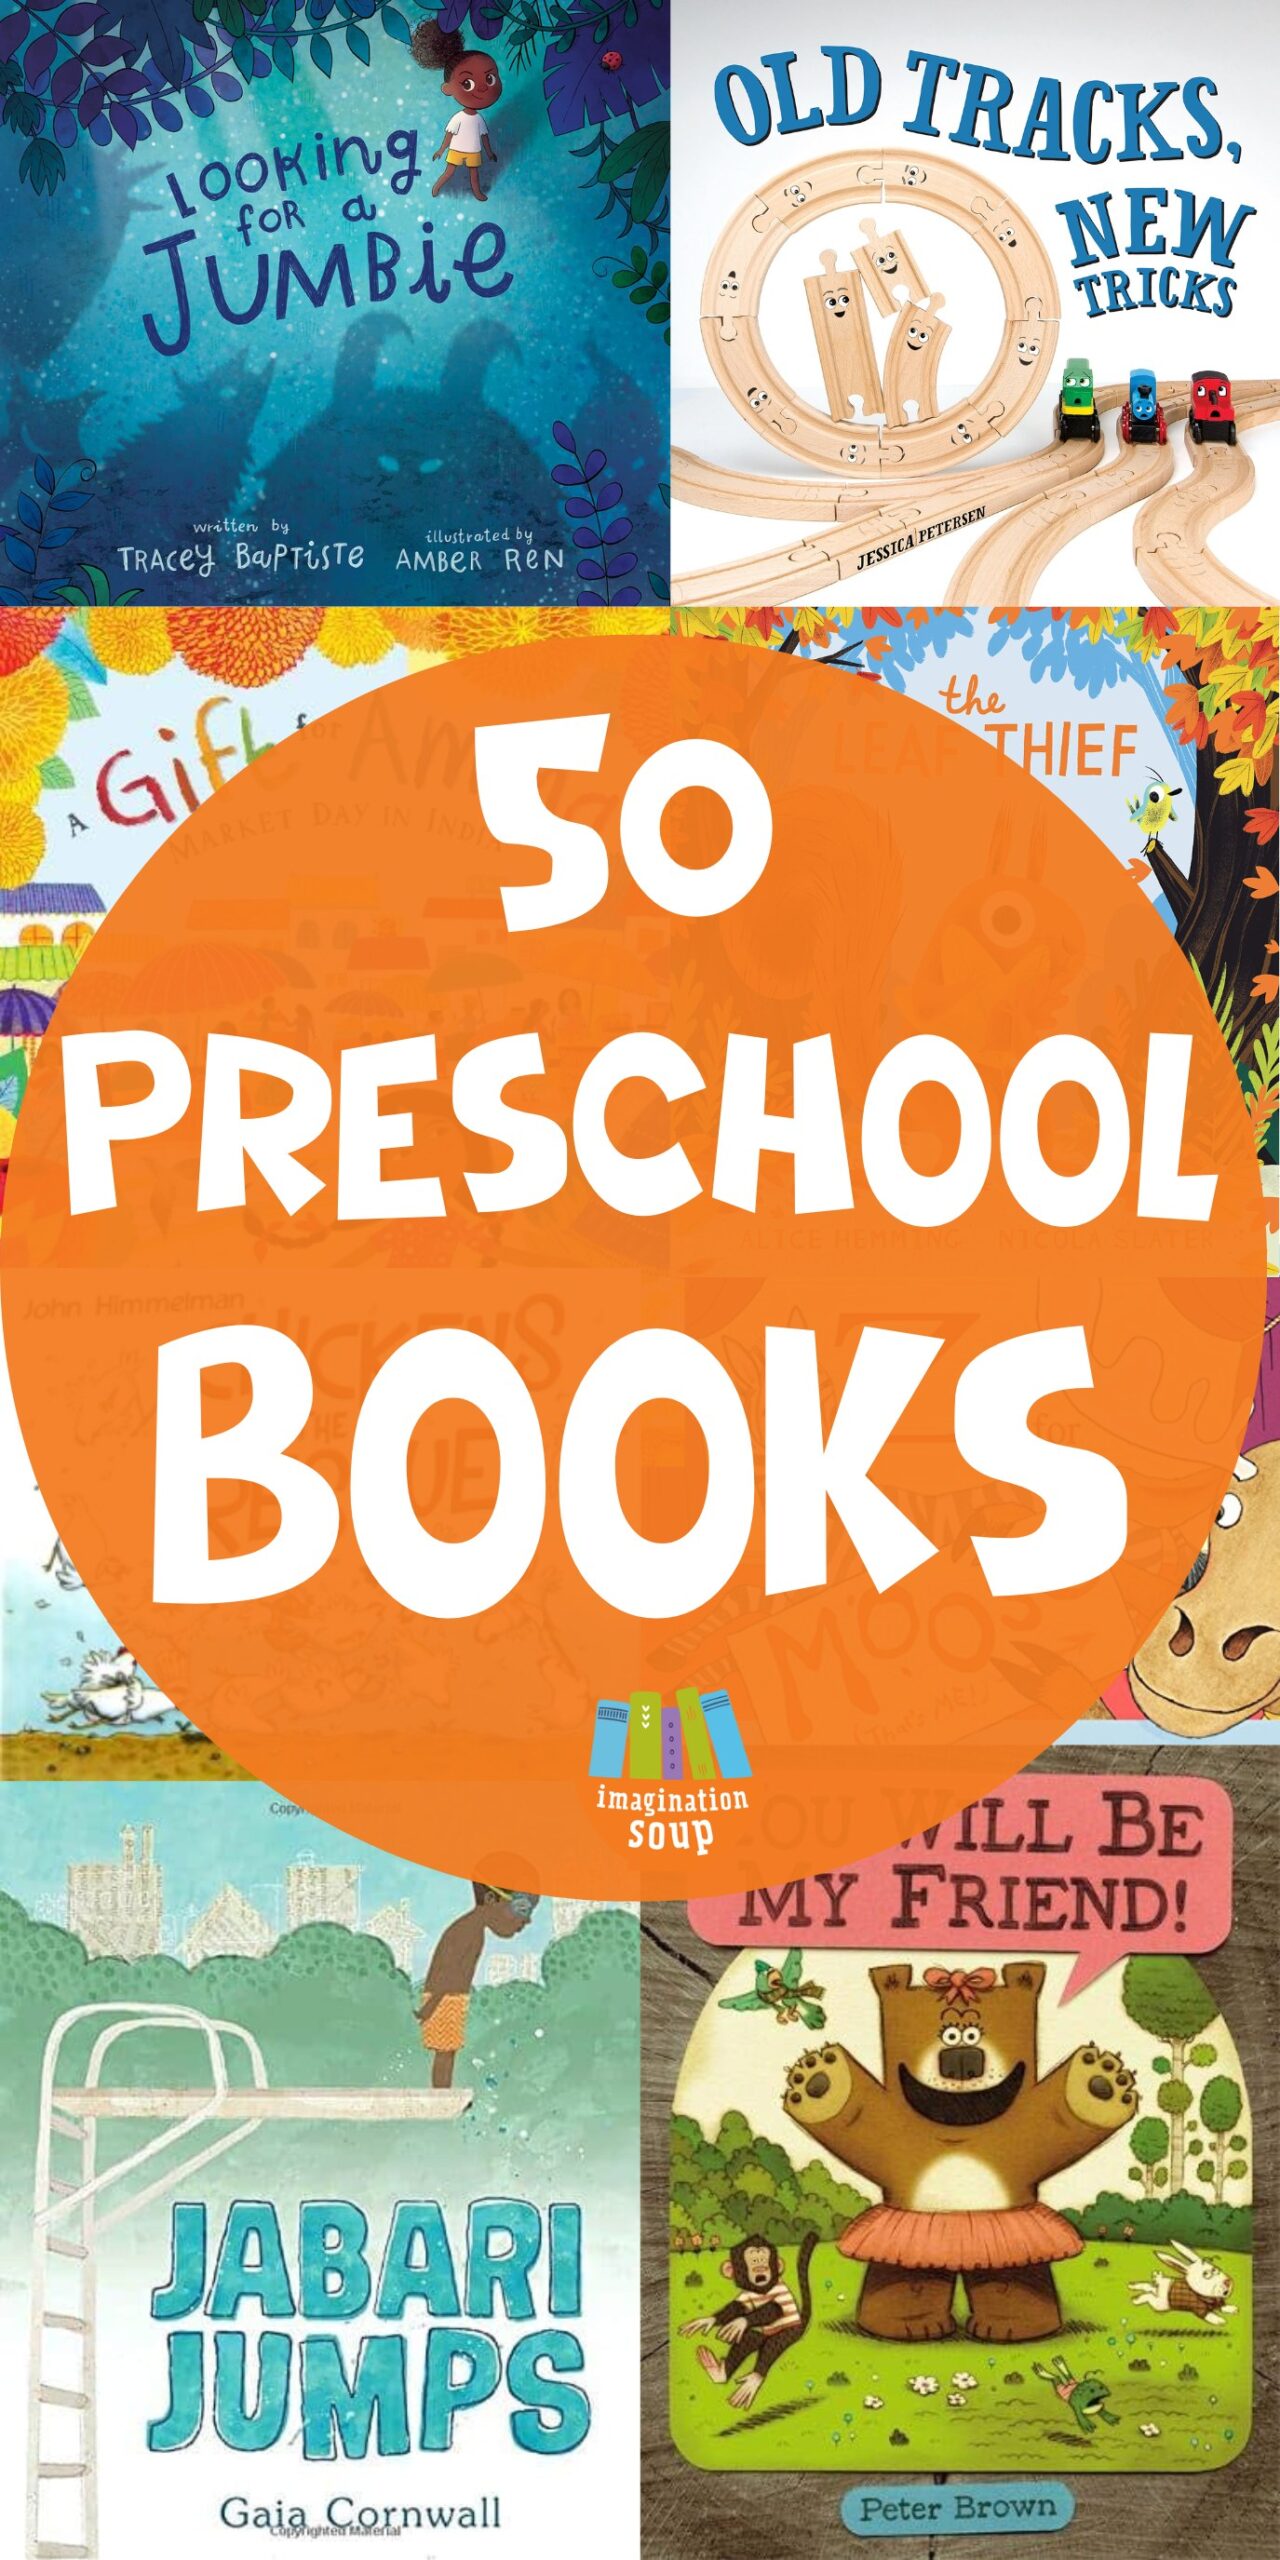 Want to know kids' favorite preschool books? Good books for 4- and 5-year-olds?

And don't you love reading aloud picture books to your preschoolers? Because at this age and stage, children are loving the humor, and learning ALL THE THINGS.